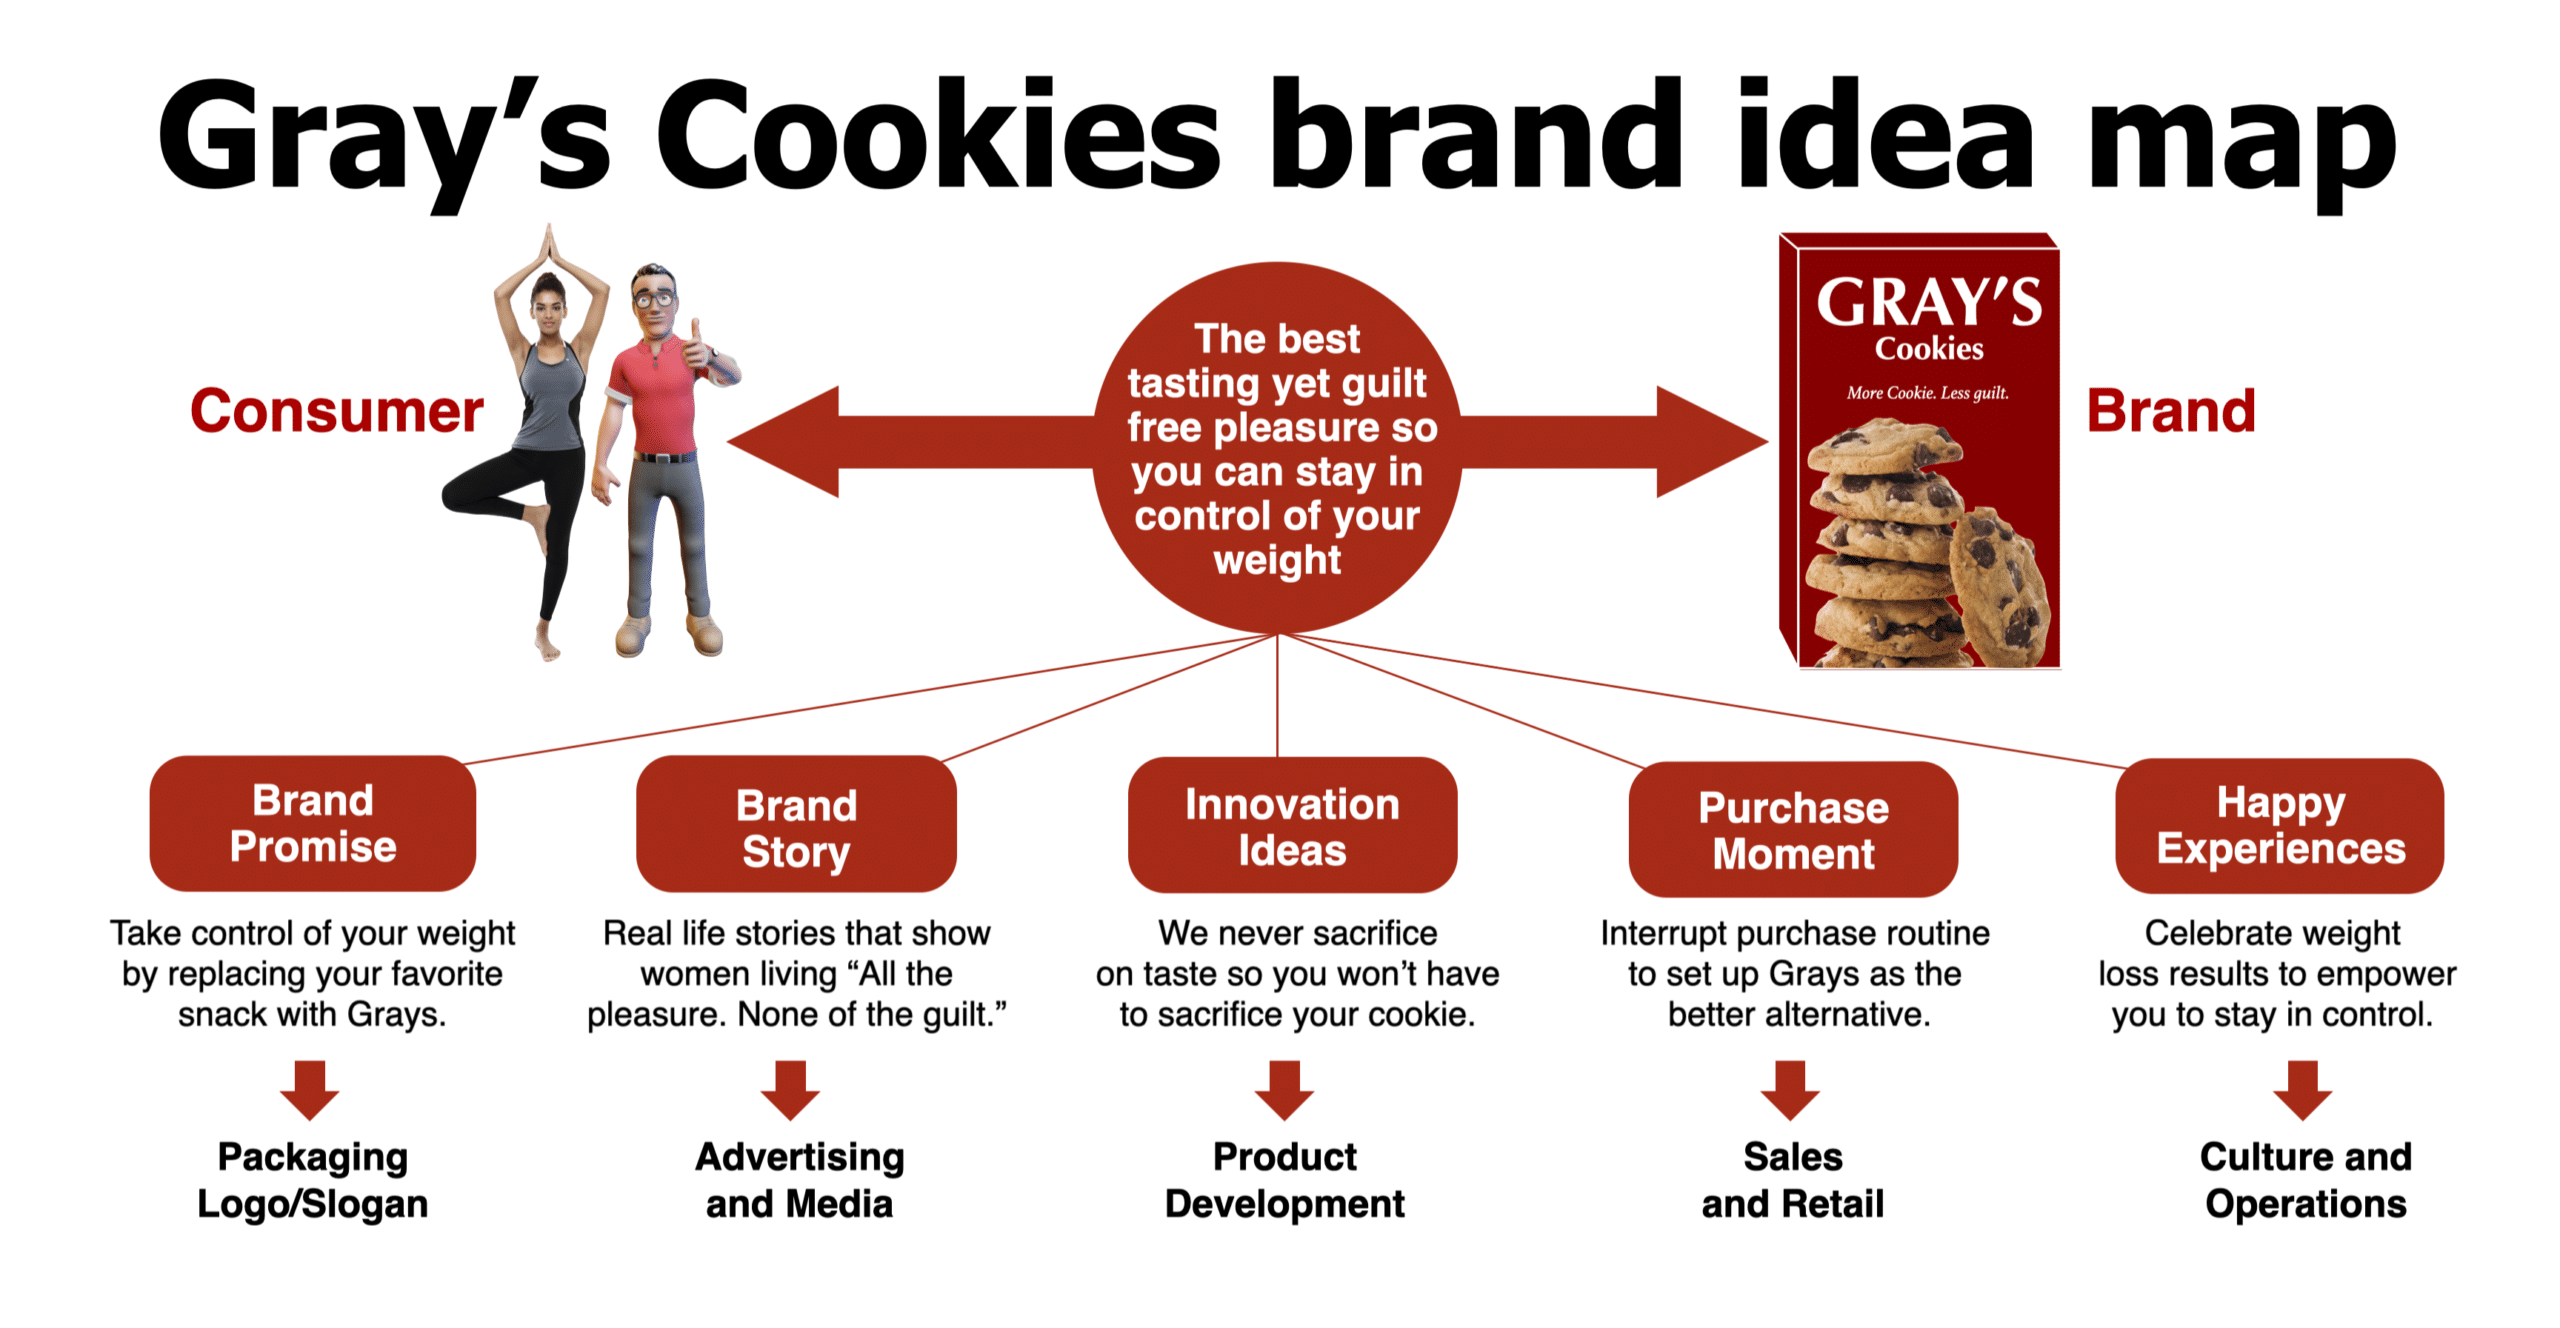 Organizing Brand Idea Map for Gray's Cookies